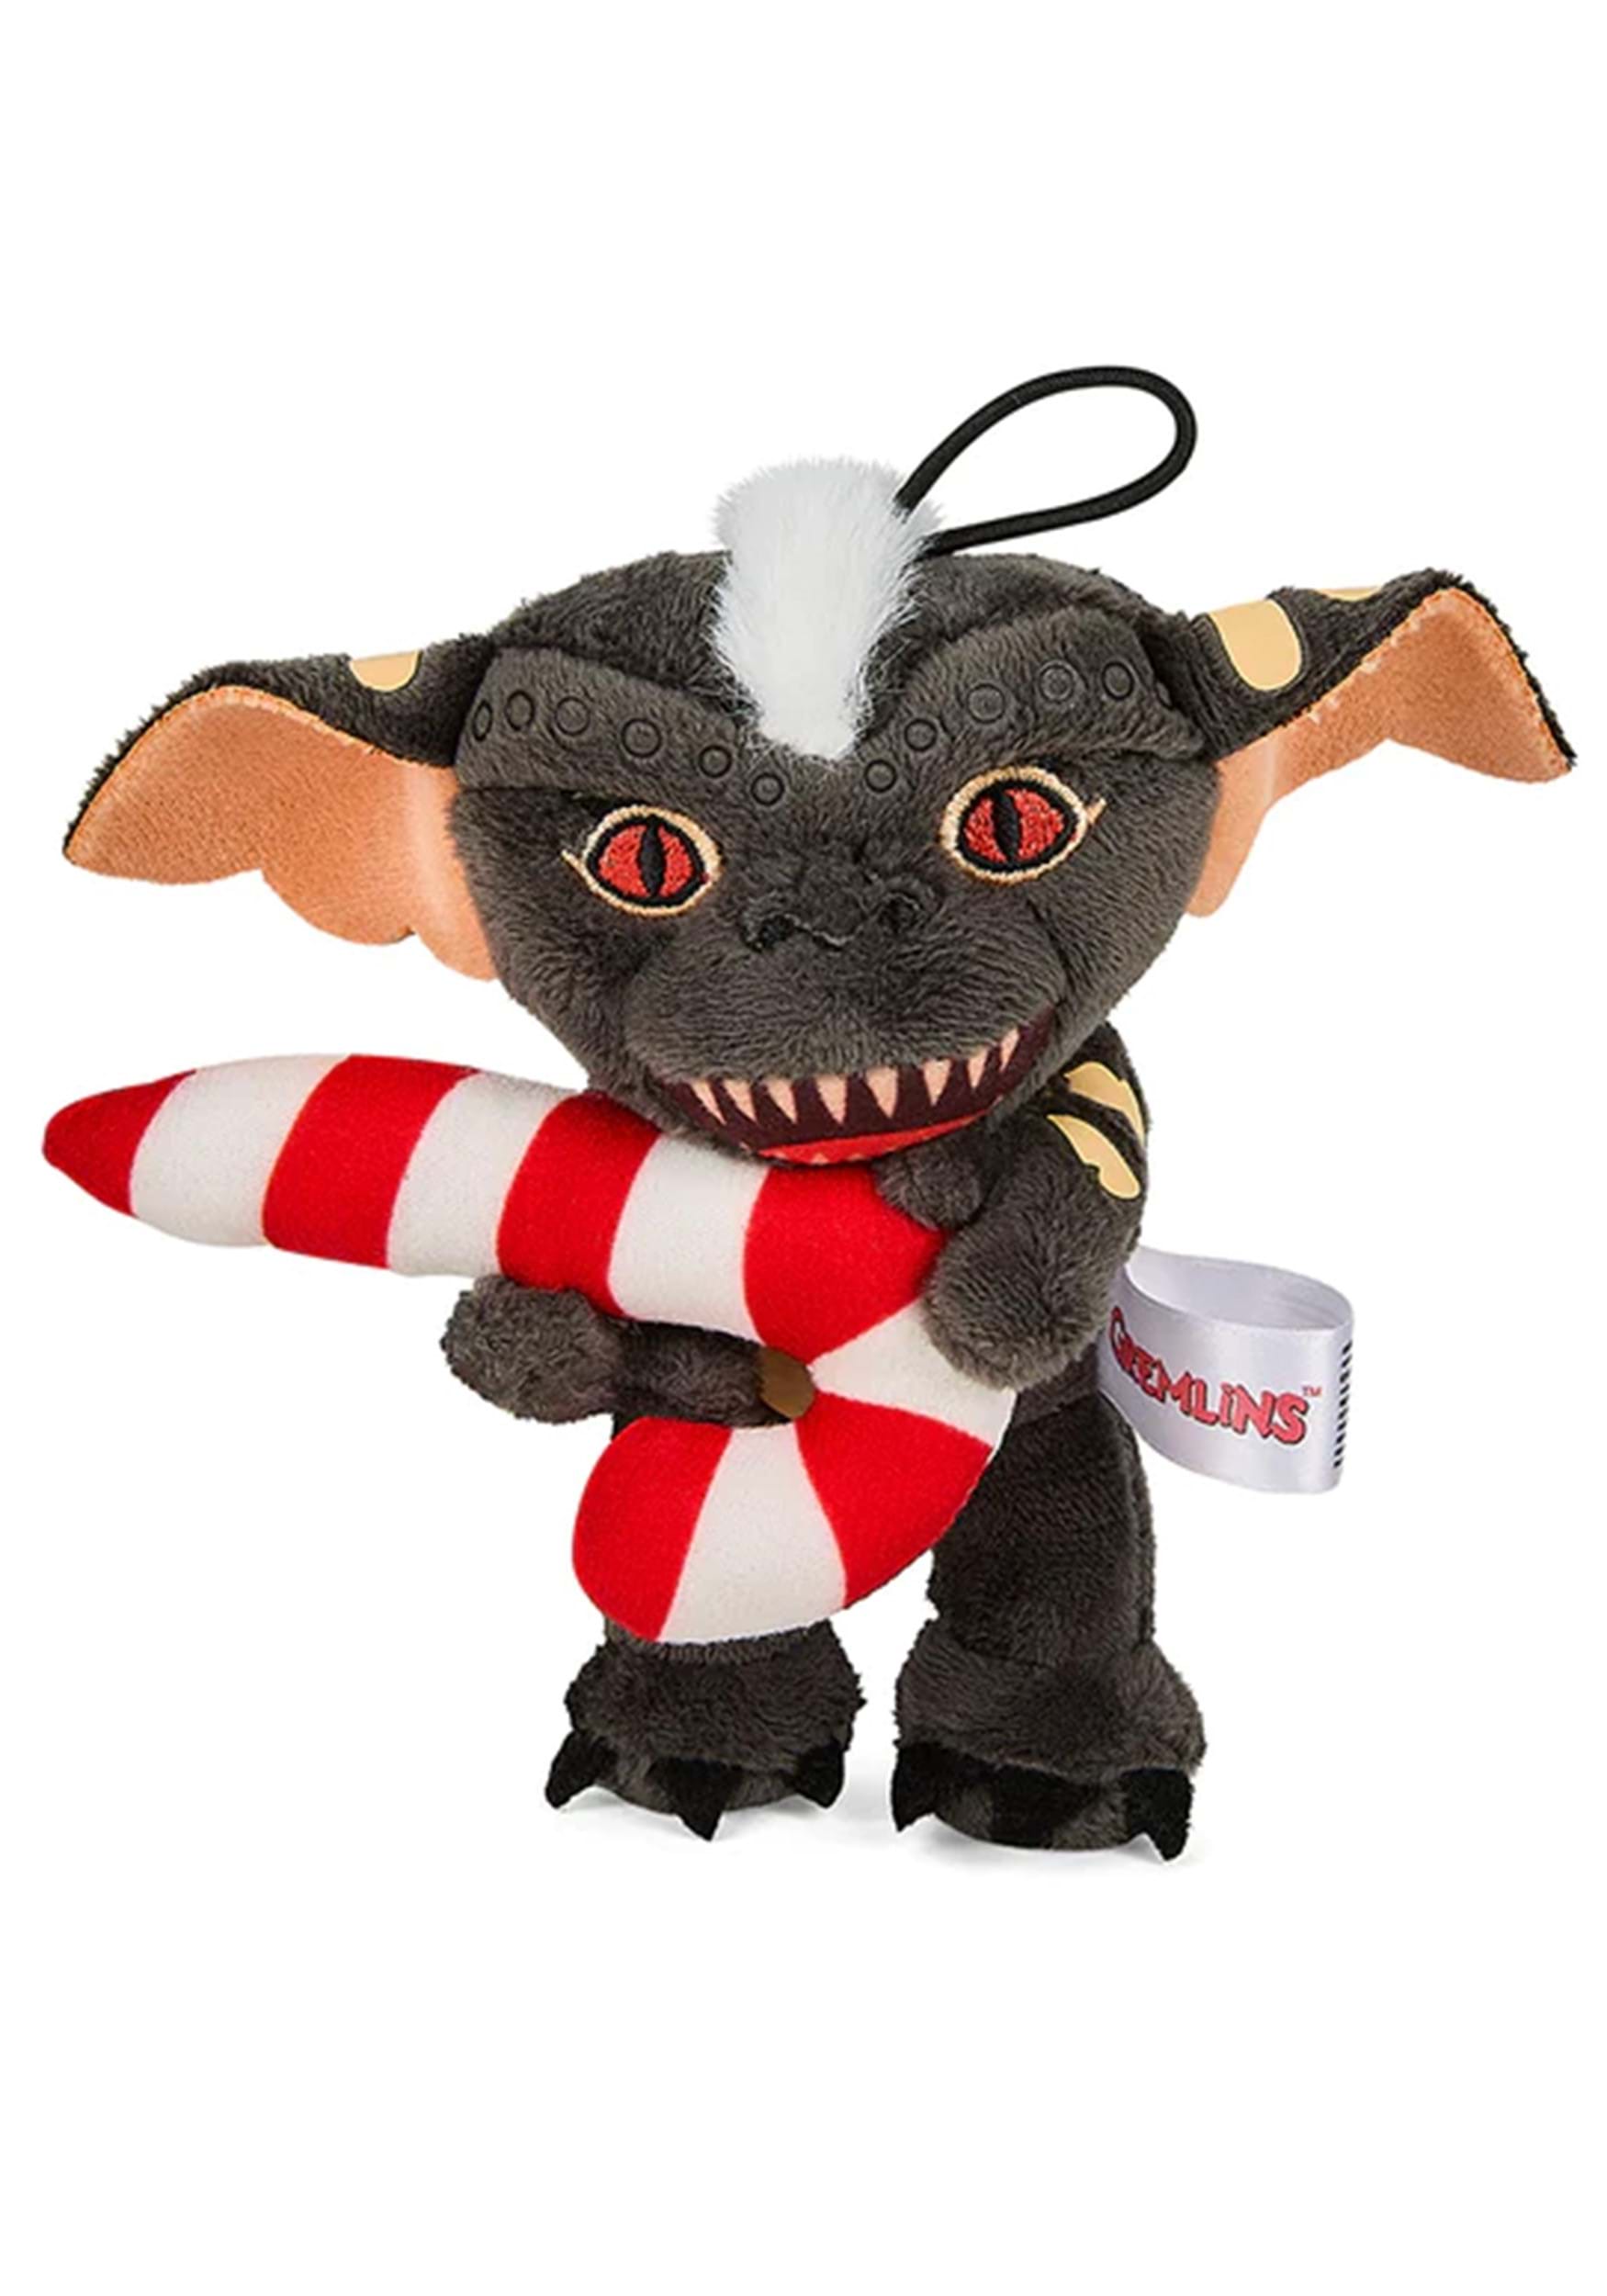 5 Pack Of Gremlins Holiday 3 Plush Ornament Set , Christmas Ornaments